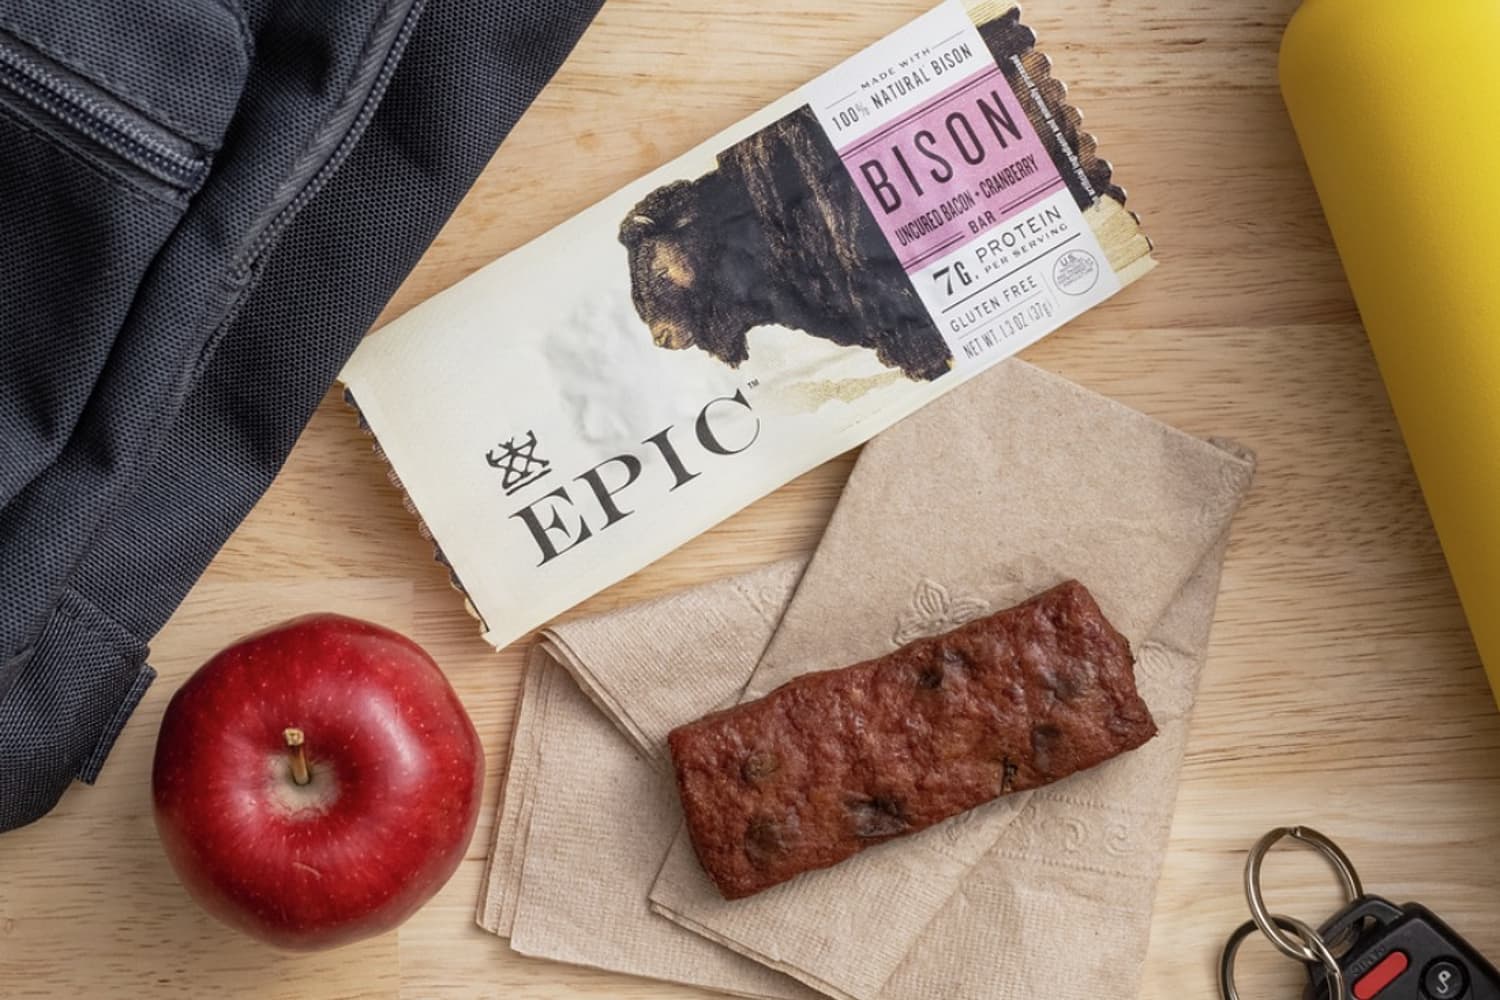 Epic Bison Bar wrapping with an bison bar next to it